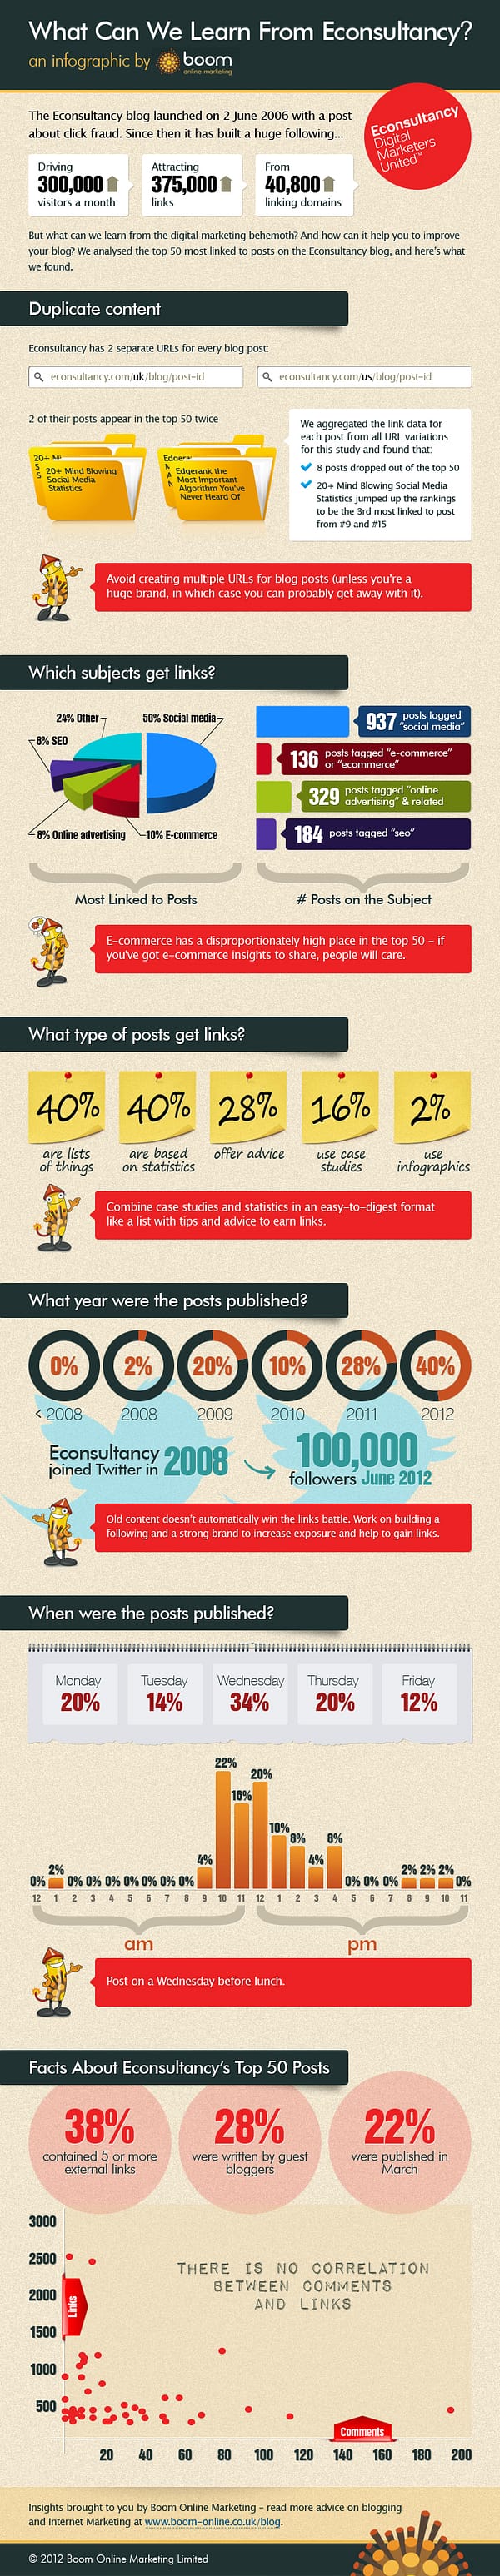 What Can We Learn from Econsultancy an infographic